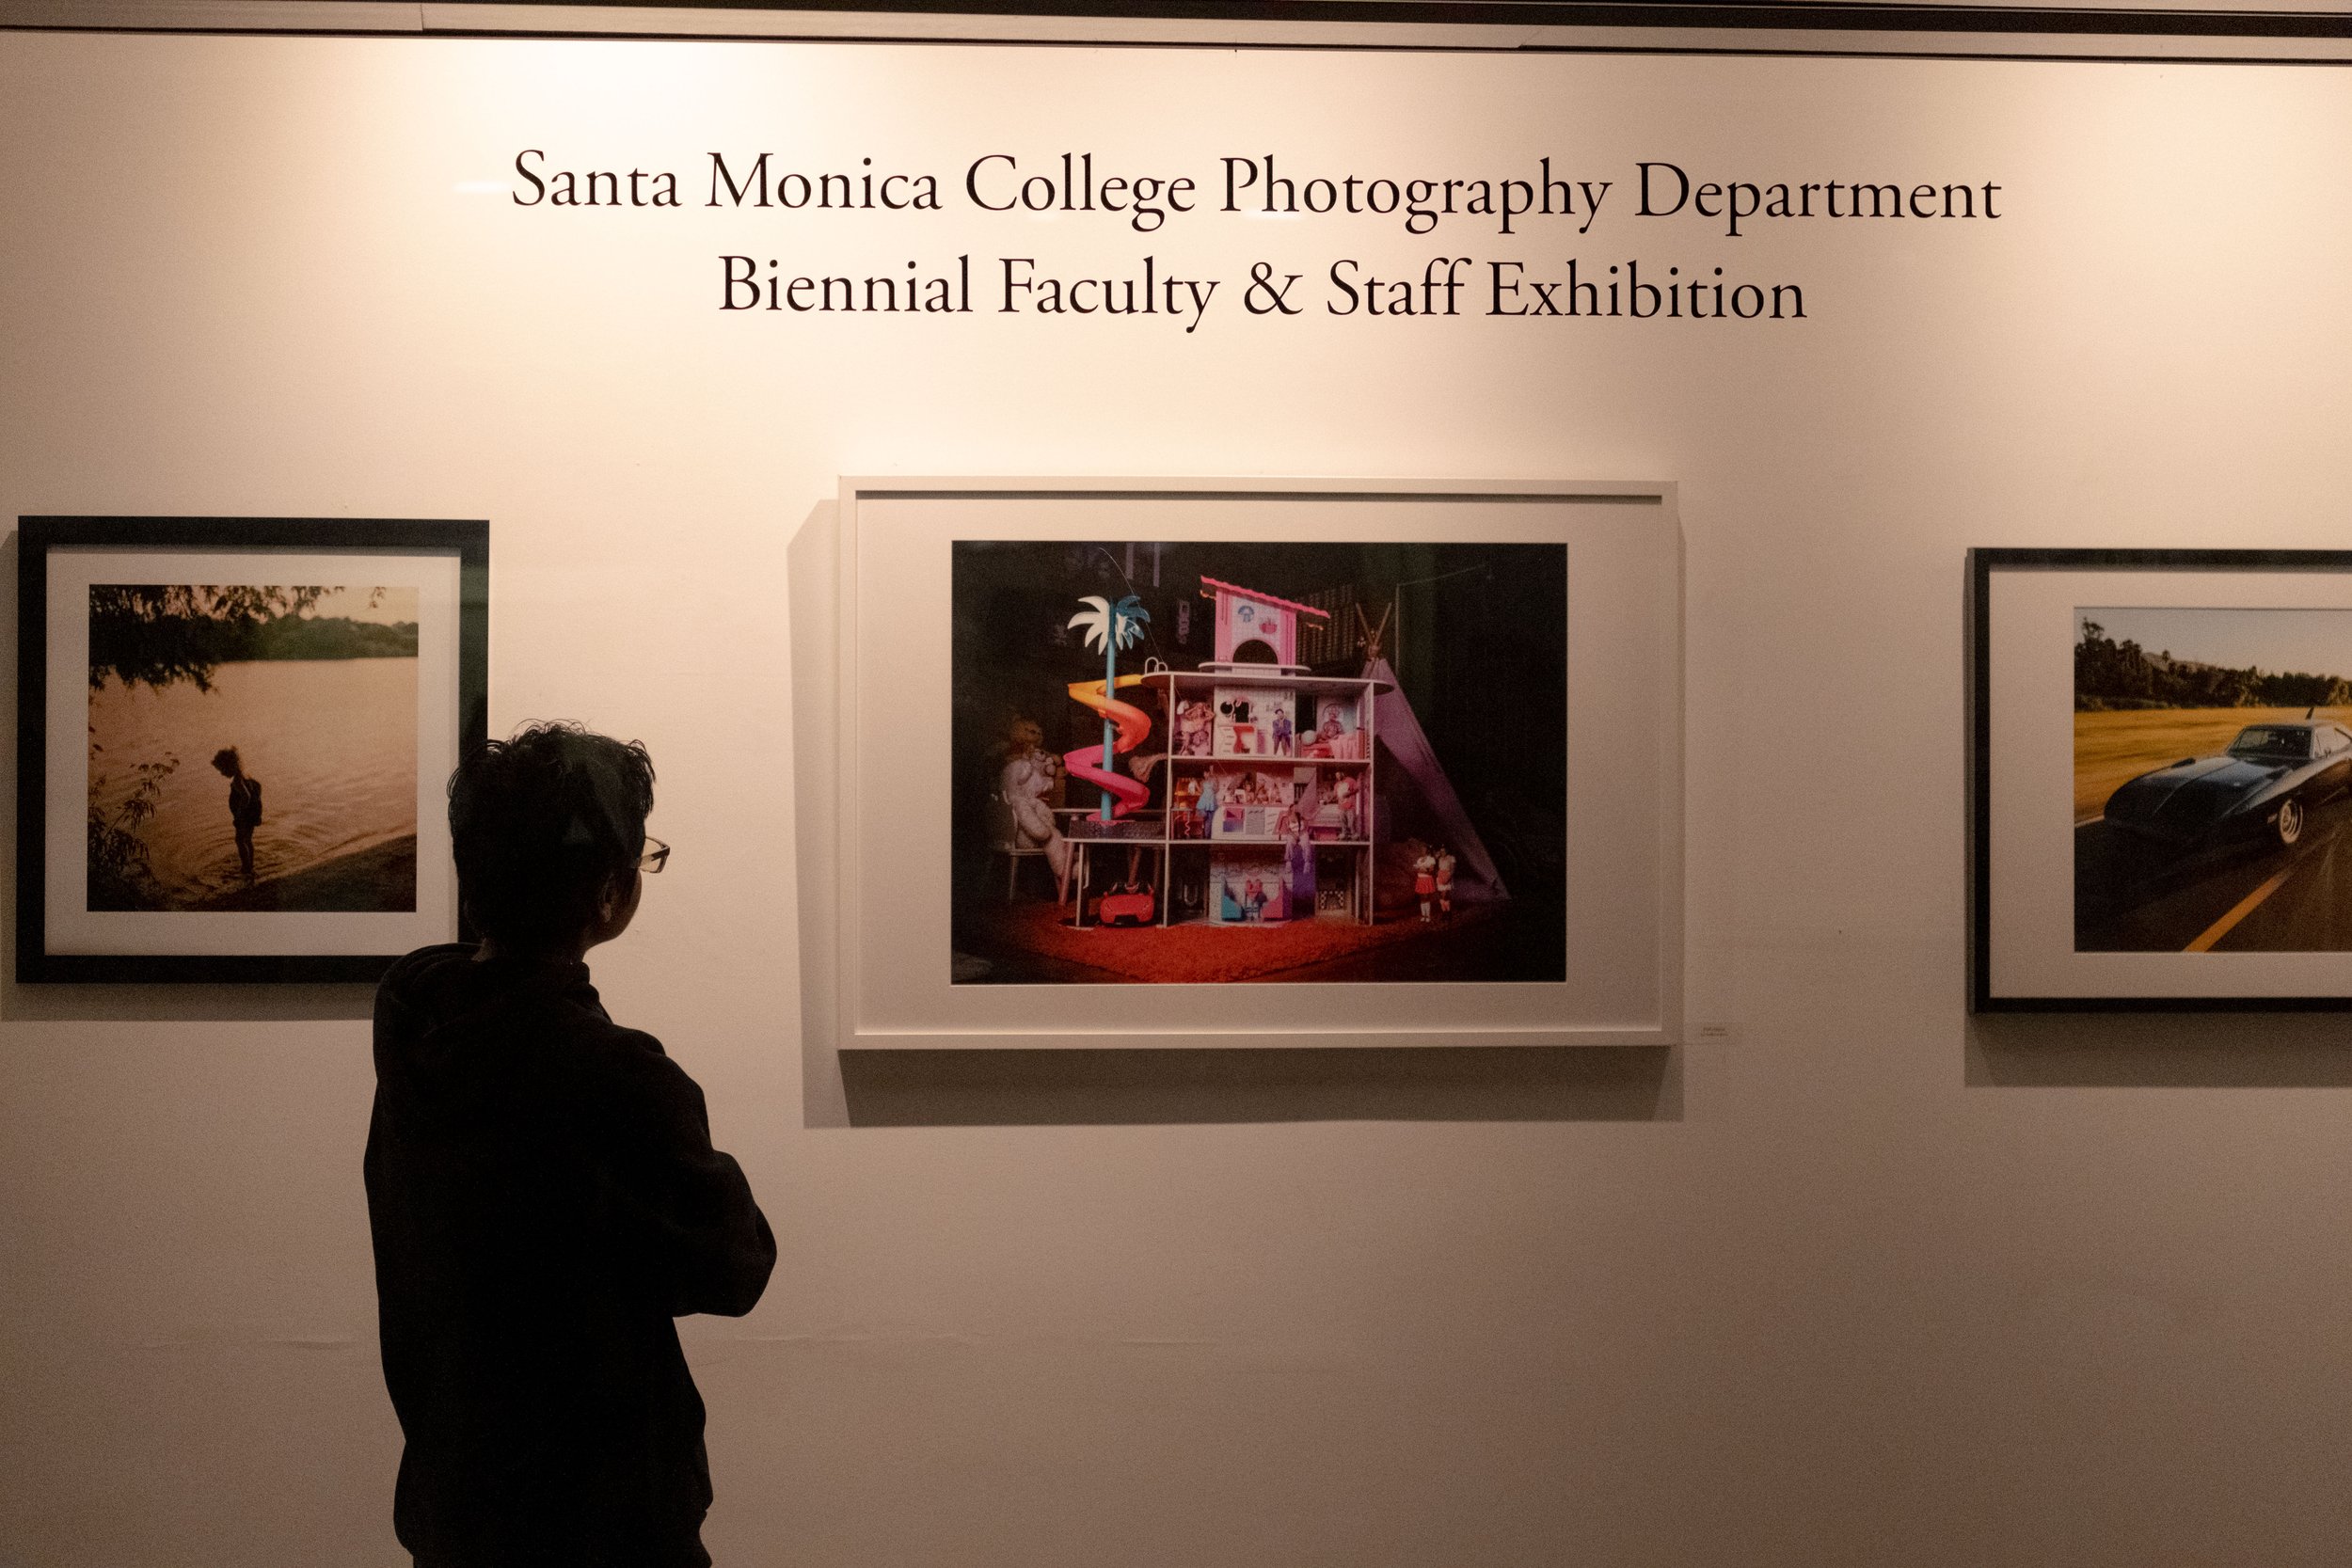  Photography student Kevin Mendoza observing the photos displayed in Drescher Hall, 2nd floor, at the Santa Monica College main campus in Santa Monica, Calif. at the opening reception of the annual Faculty & Staff Exhibition and Silent Auction Fundra